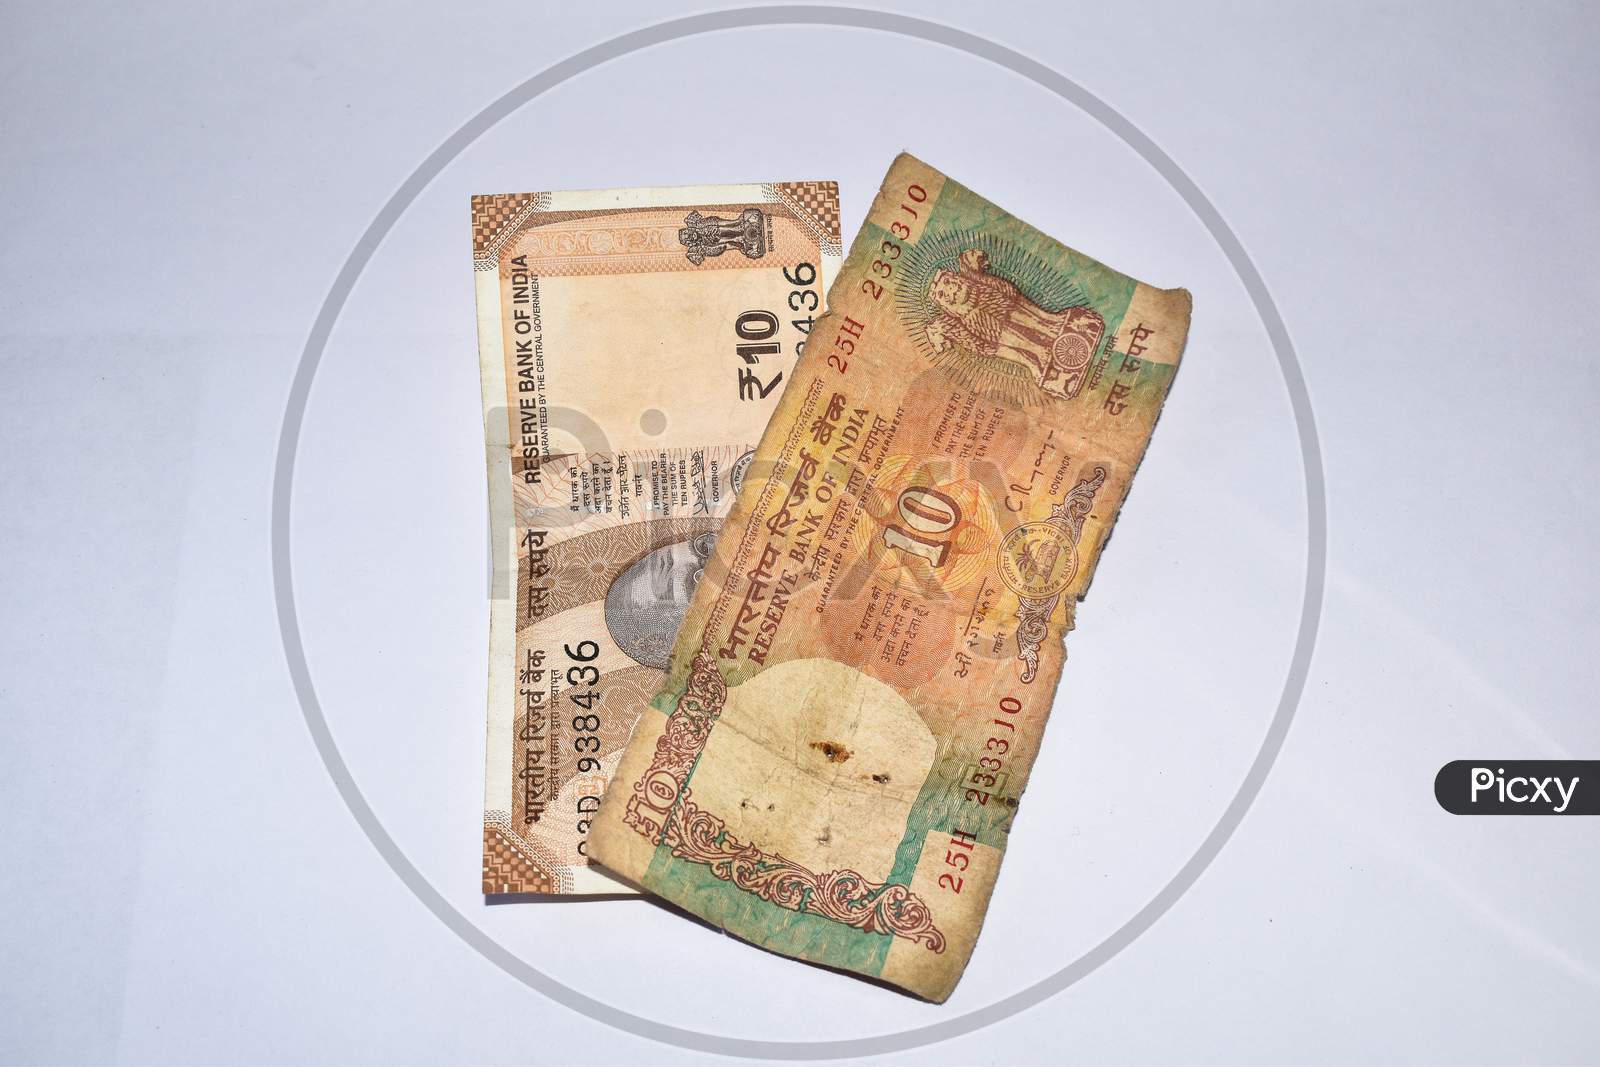 Old 10 Rupees Indian Currency Note And New 10 Rupees Currency Notes Kept Together On White Background.